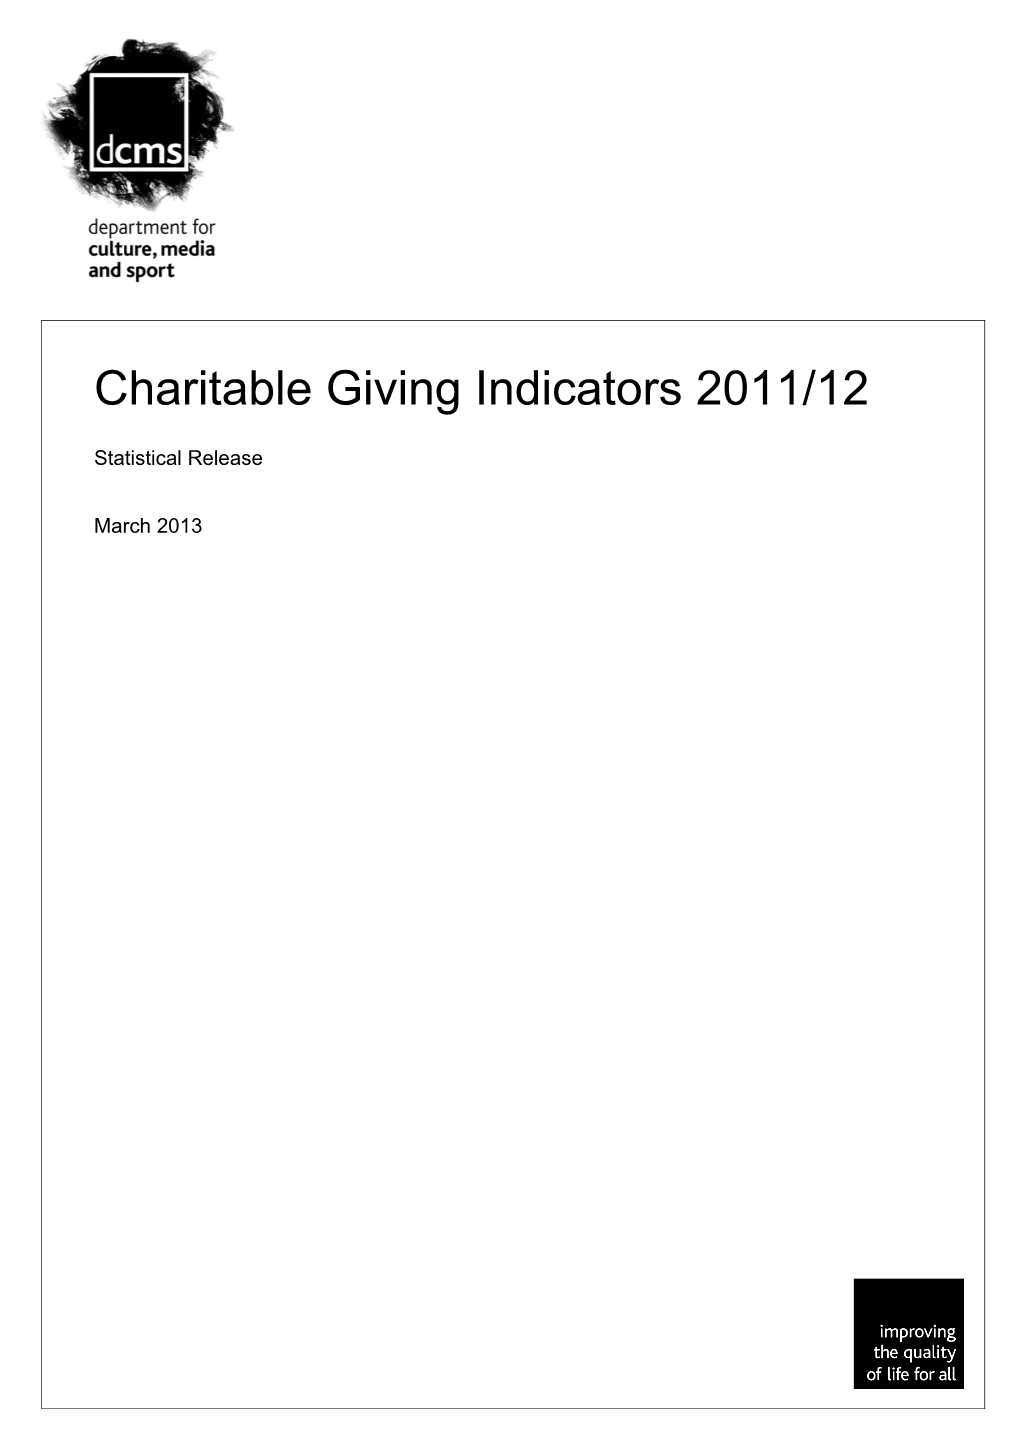 Charitable Giving Indicators Is an Official Statistic and Has Been Produced to the Standards